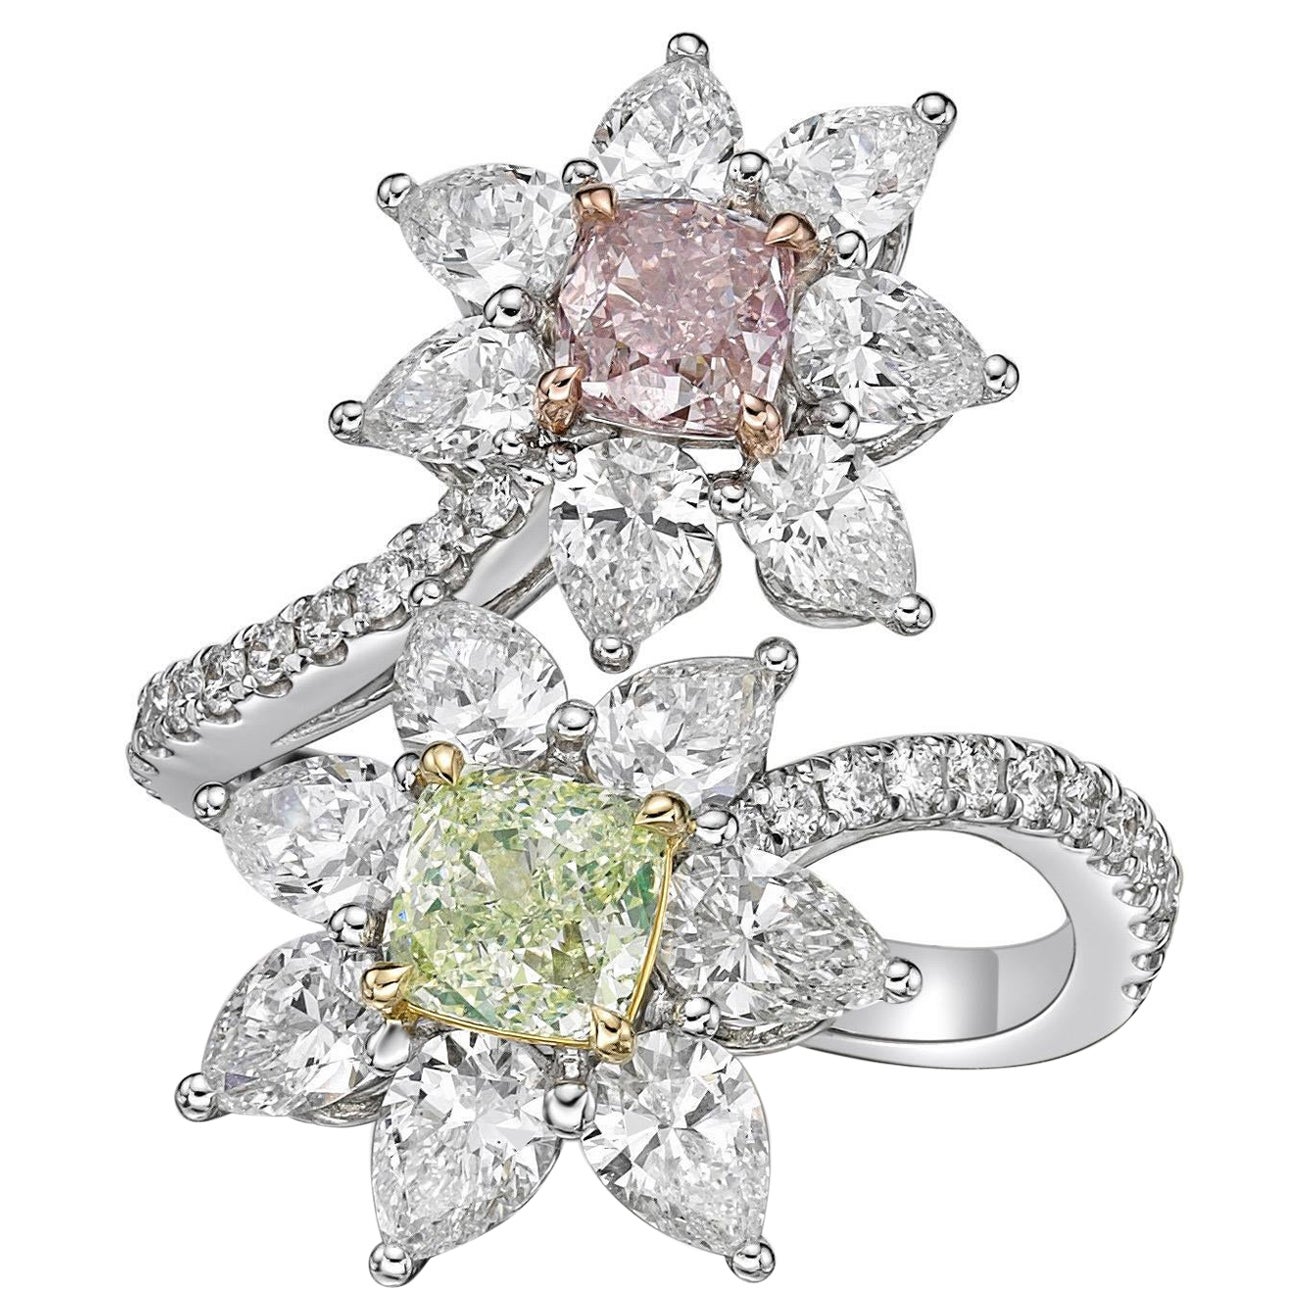 Emilio Jewelry Gia Certified Fancy Green Pink 4.10 Carat Diamond Ring For Sale